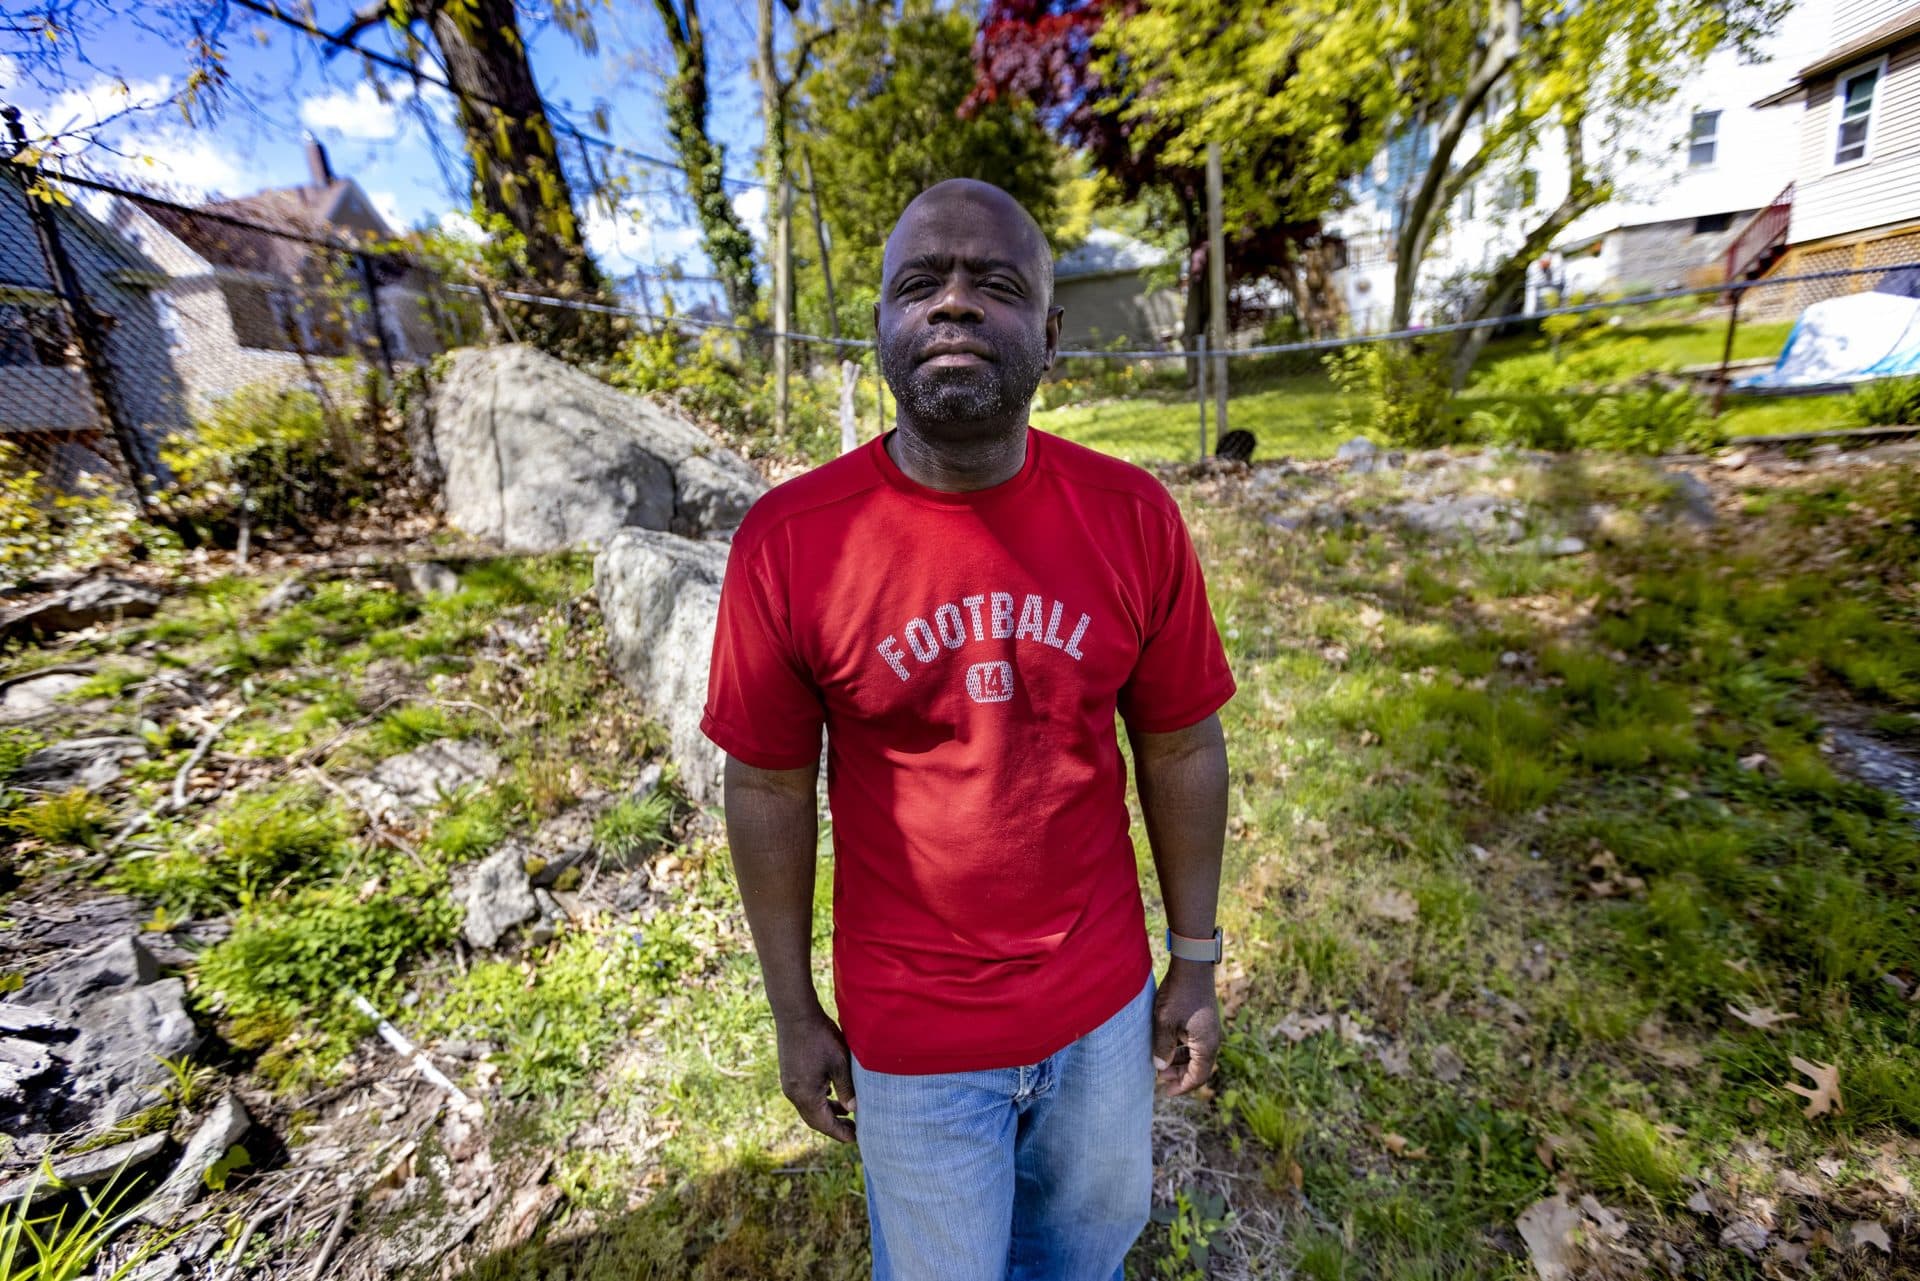 Rigaubert Aime had to wait 10 years before obtaining a final judgment in his discrimination case.  (Jesse Costa/WBUR)